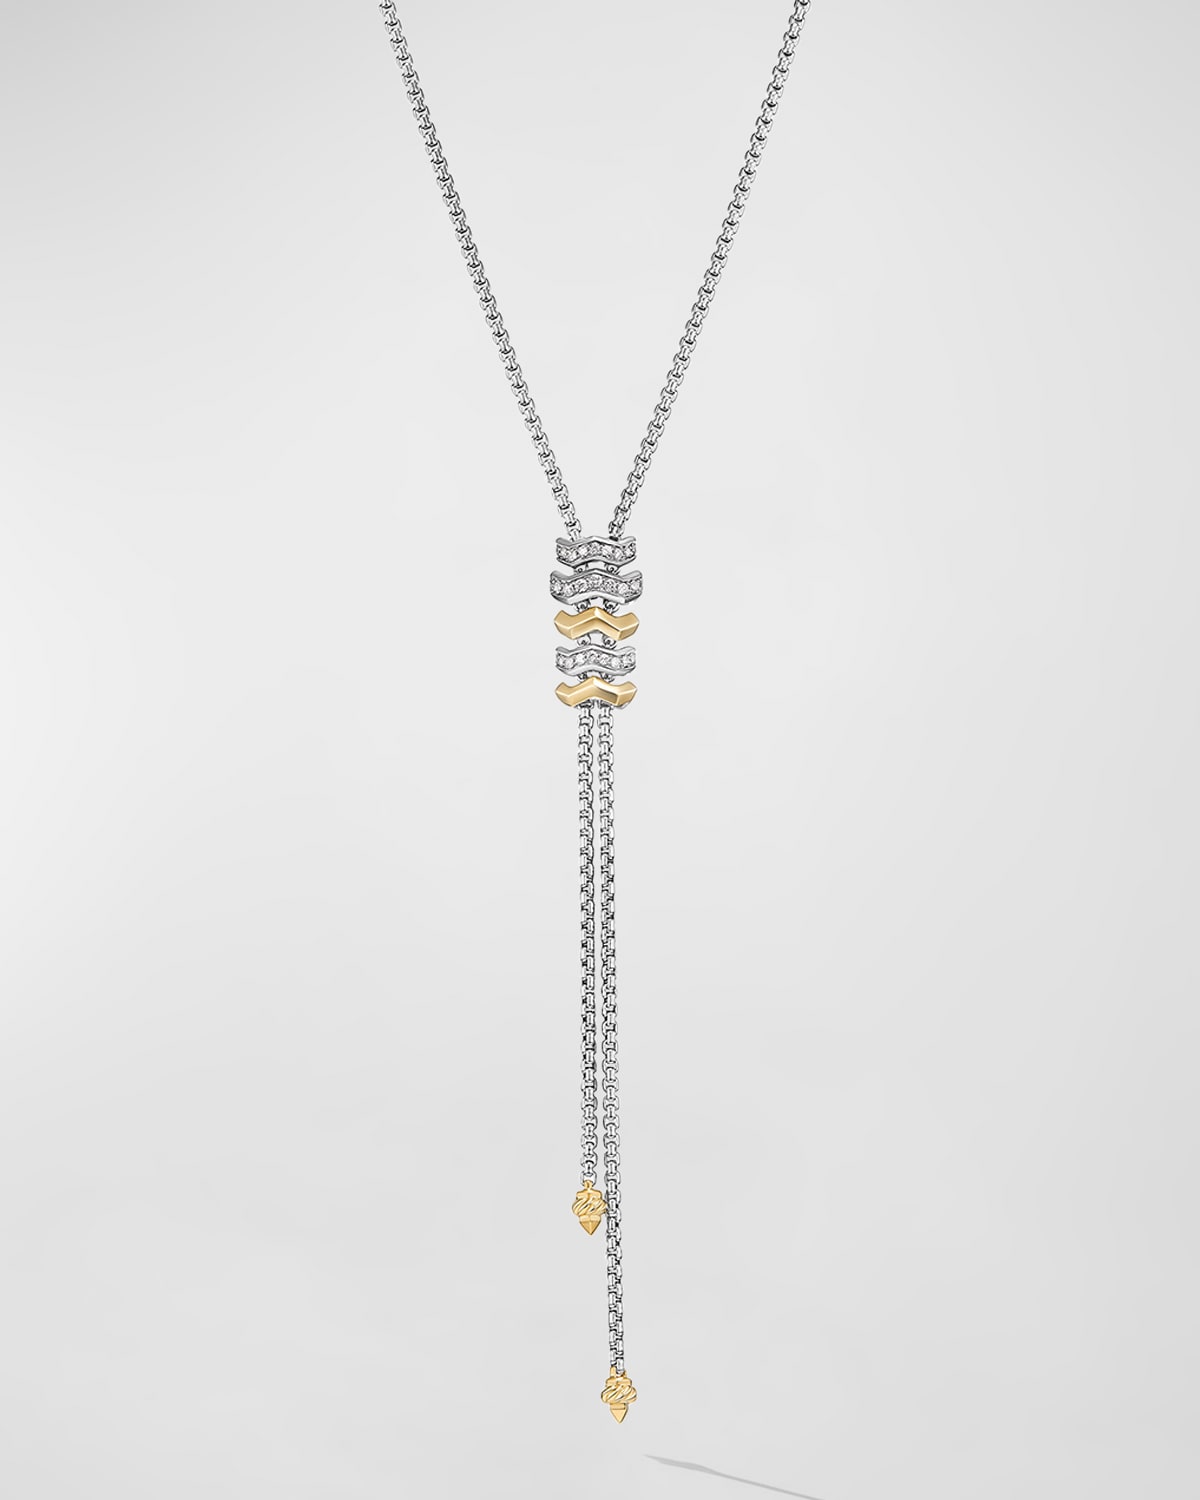 Stax Y Necklace with Diamonds in 18K Gold and Silver, 20mm, 17-20"L